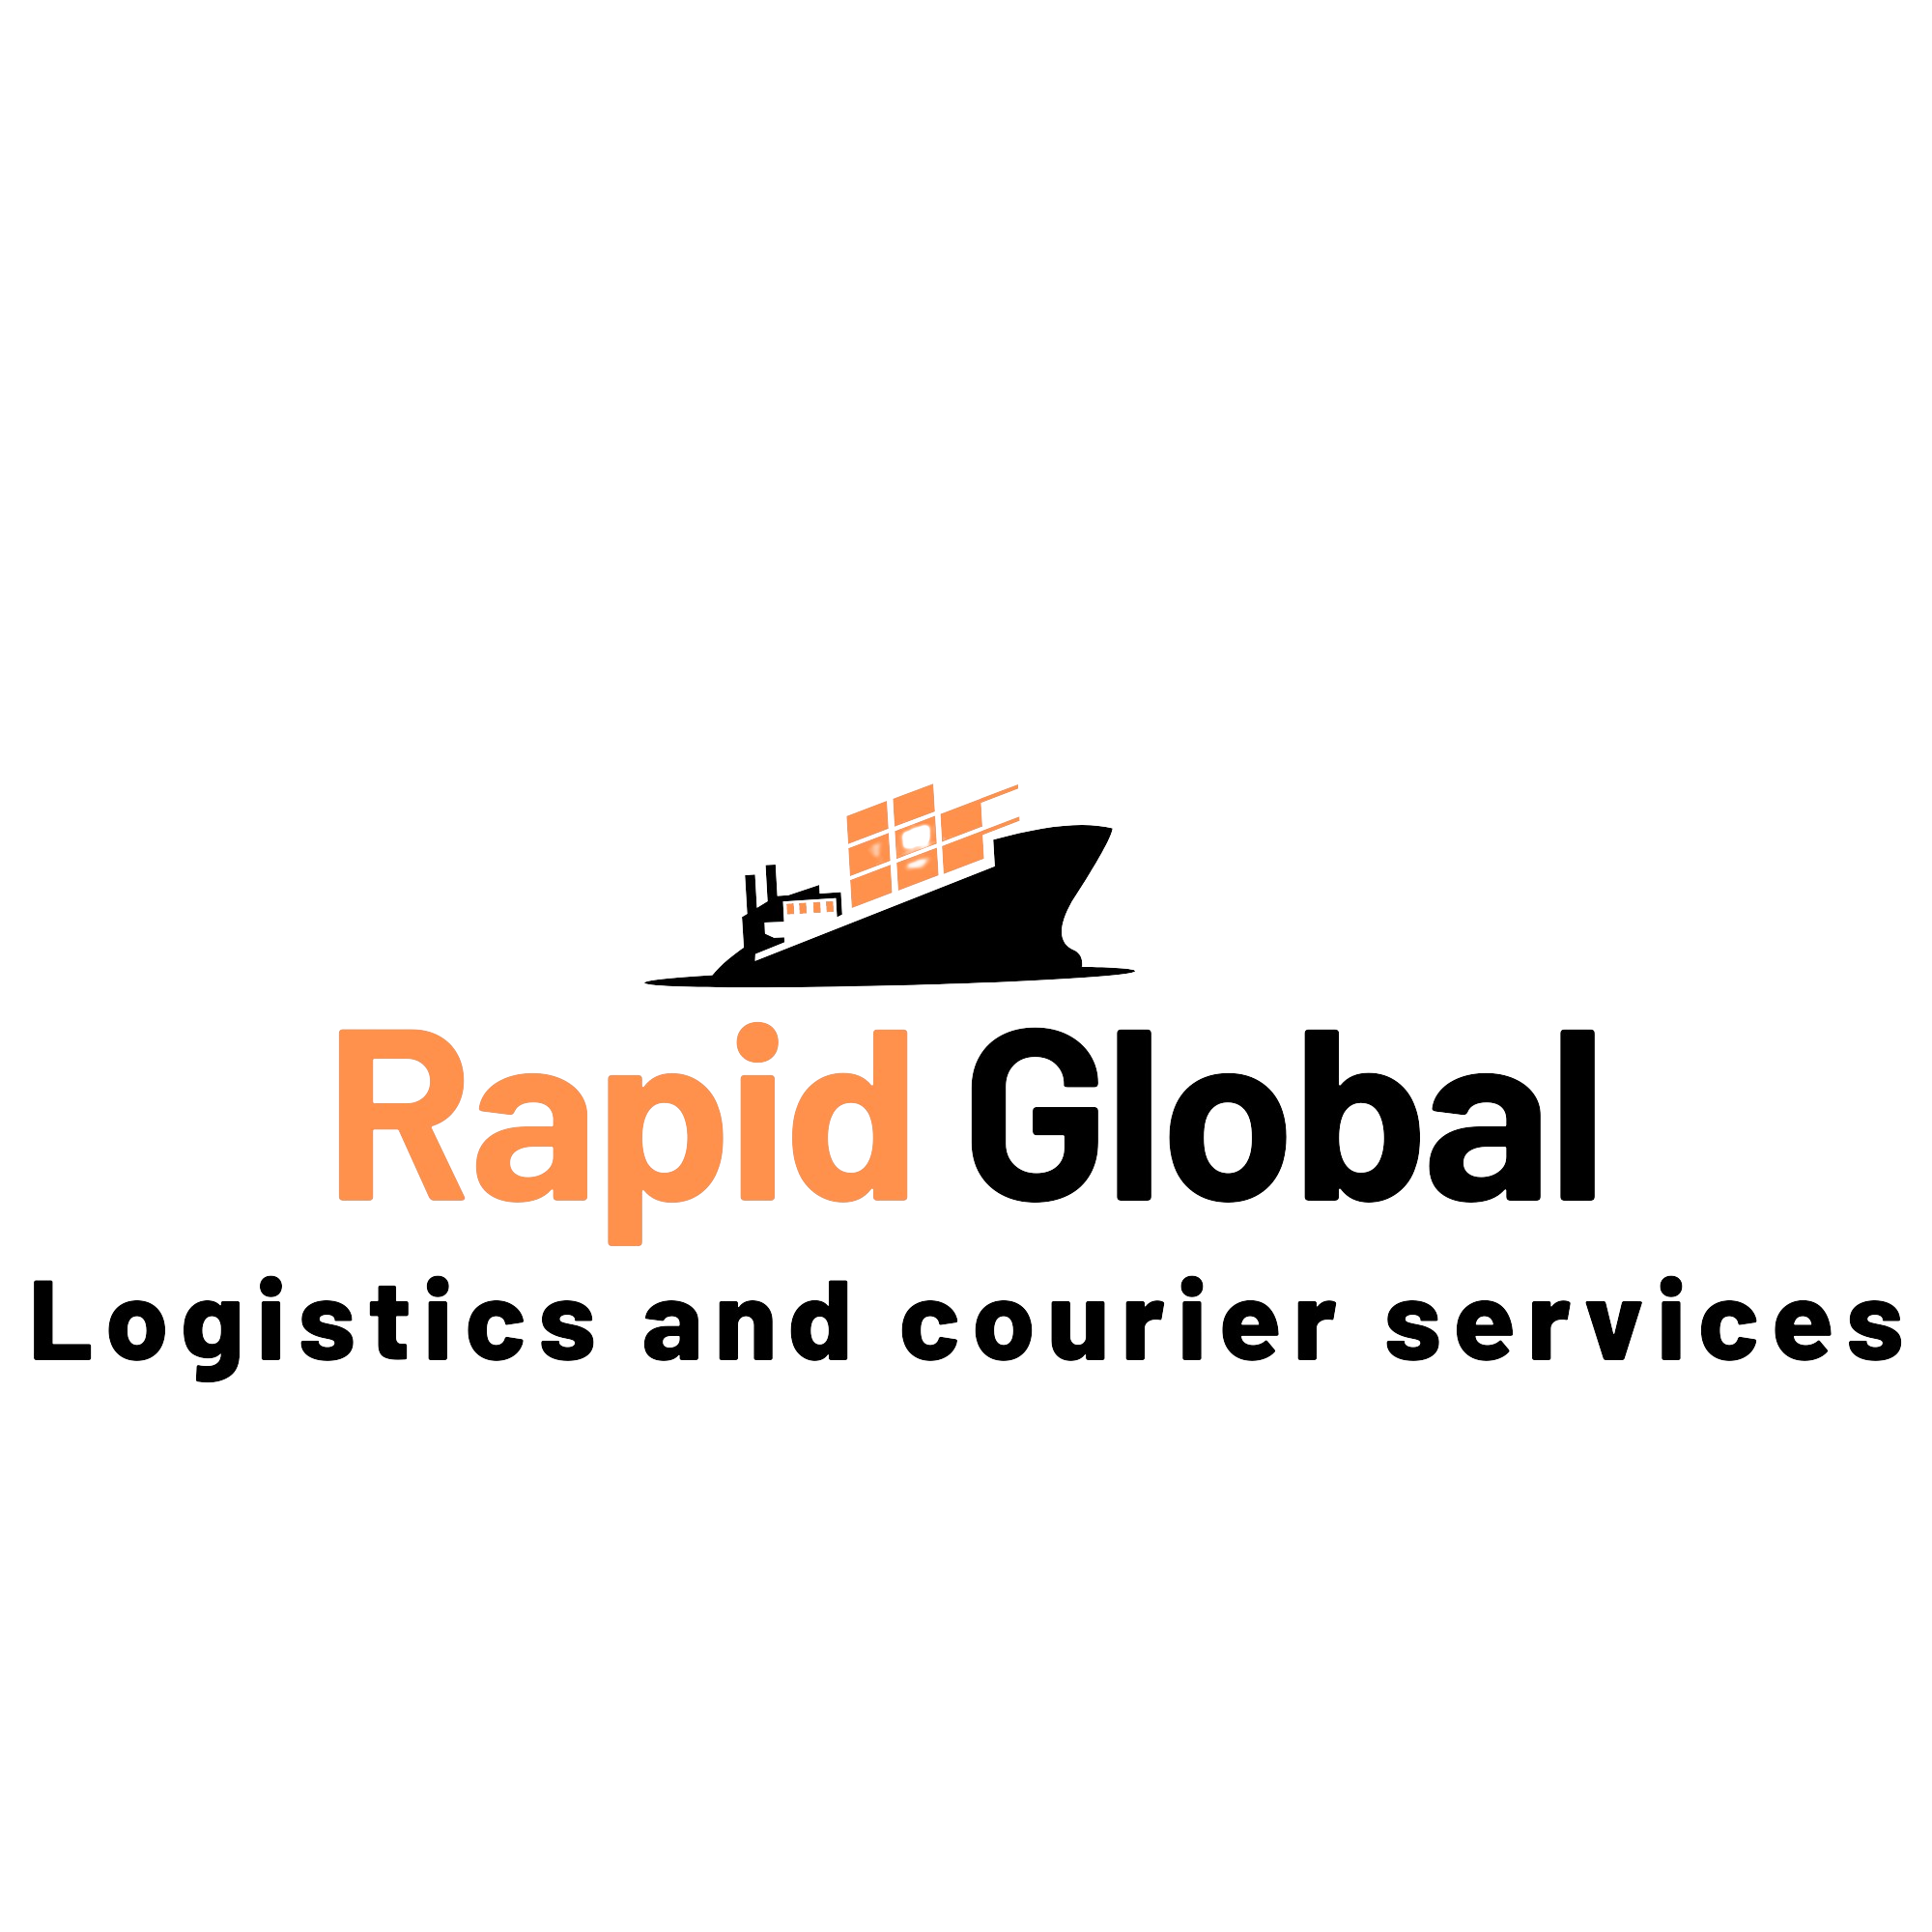 Rapid global logistics and courier Services